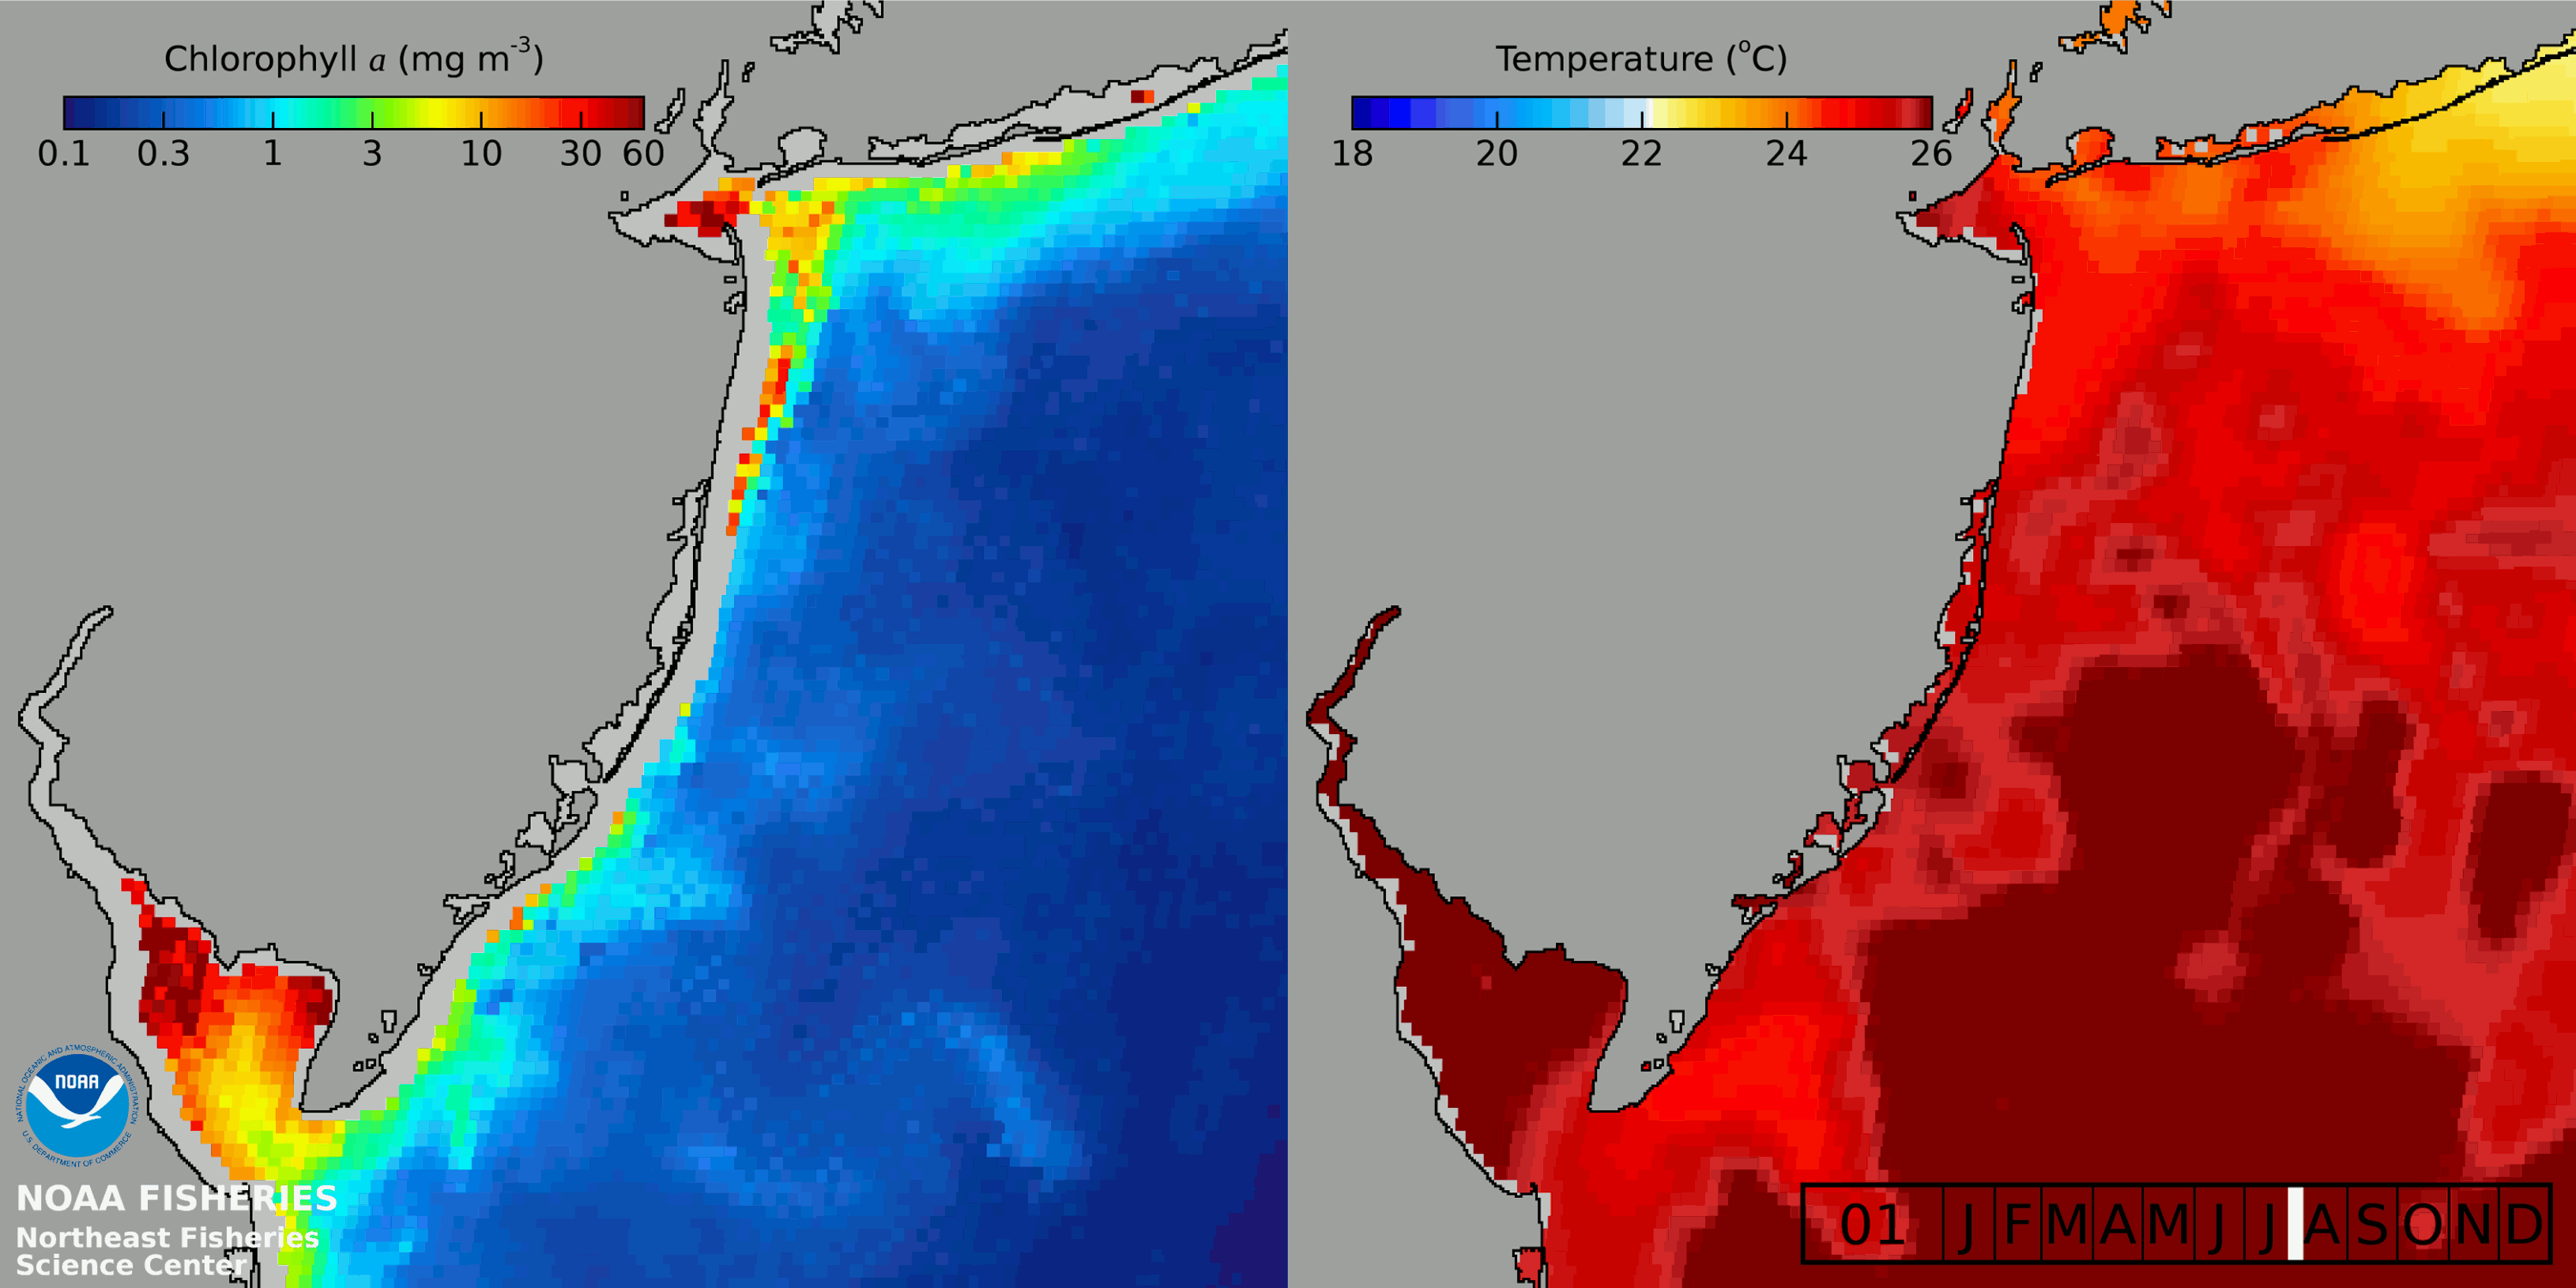 A time lapse of temperature (right) and chlorophyll α concentration (left) during an upwelling event in the Mid-Atlantic.